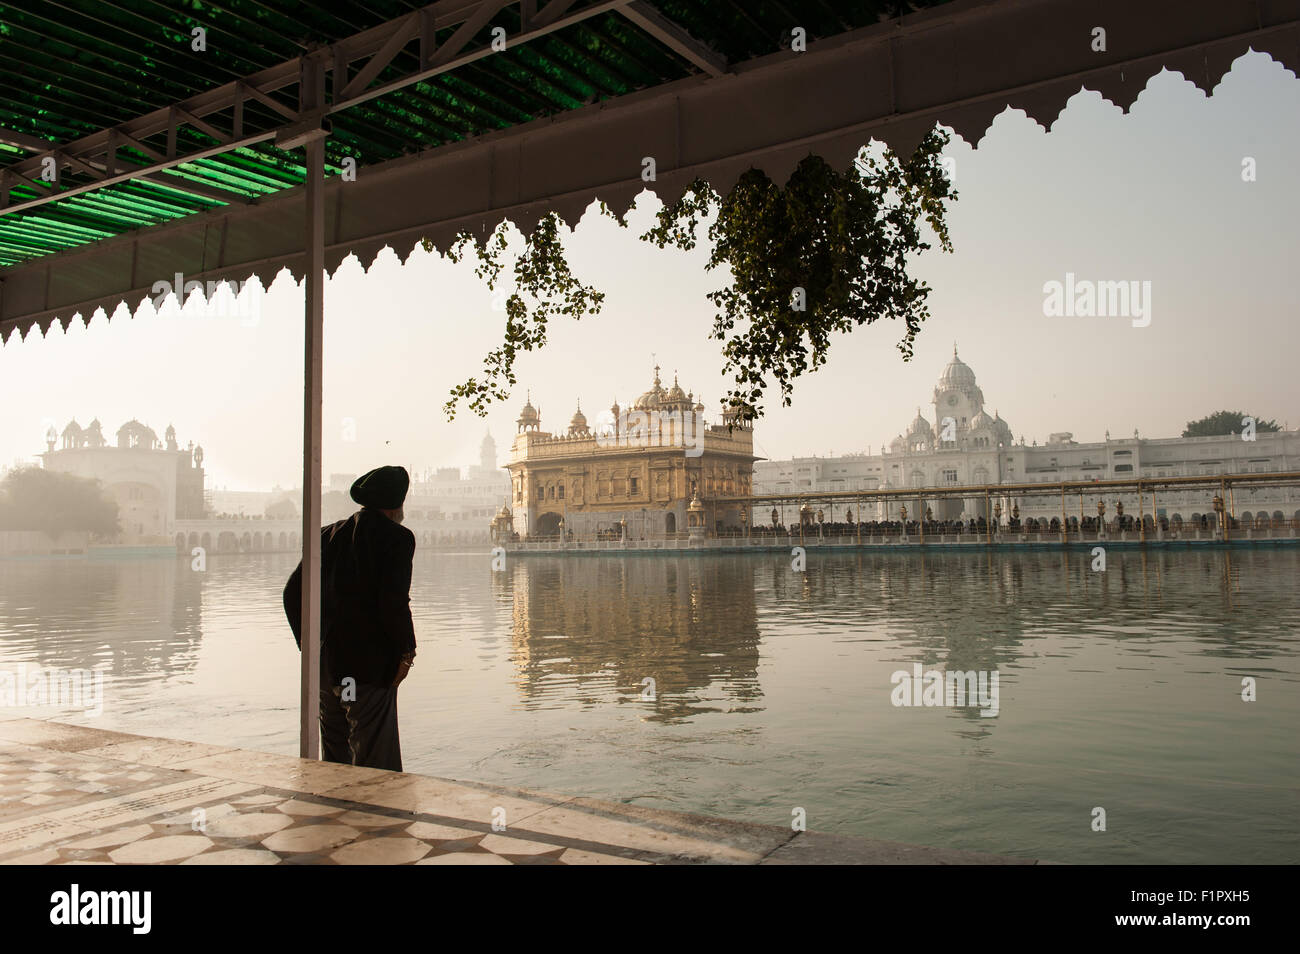 Amritsar, Punjab, India.  The Golden Temple - Harmandir Sahib - at dawn with an old Sikh bathing his feet in the holy waters. Stock Photo